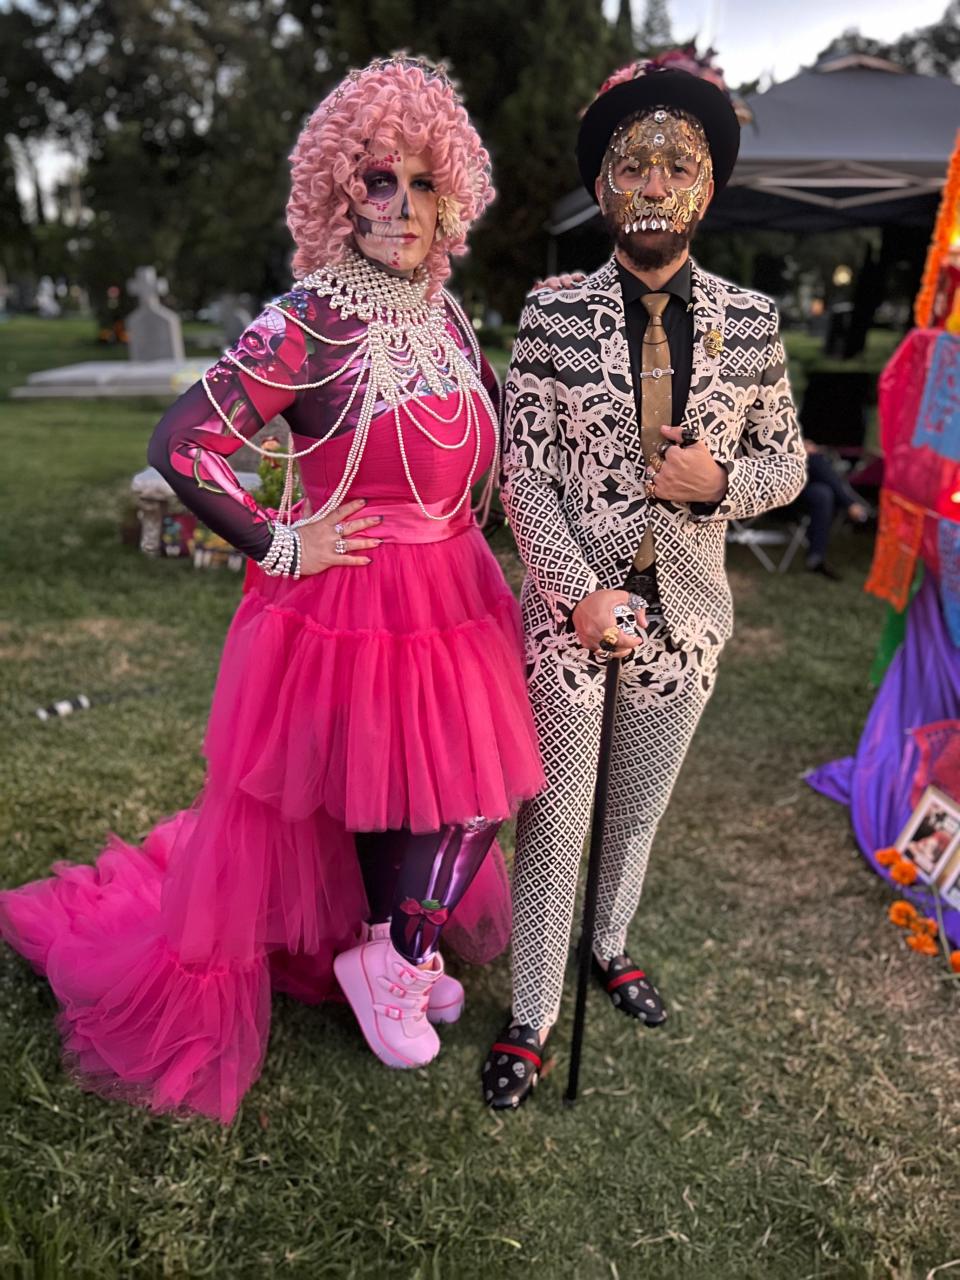 Melissa Hall and Rigel Anderson of Los Angeles display their looks at the Día de Los Muertos celebration at the Hollywood Forever Cemetery in Los Angeles on Saturday, Oct. 28, 2023.